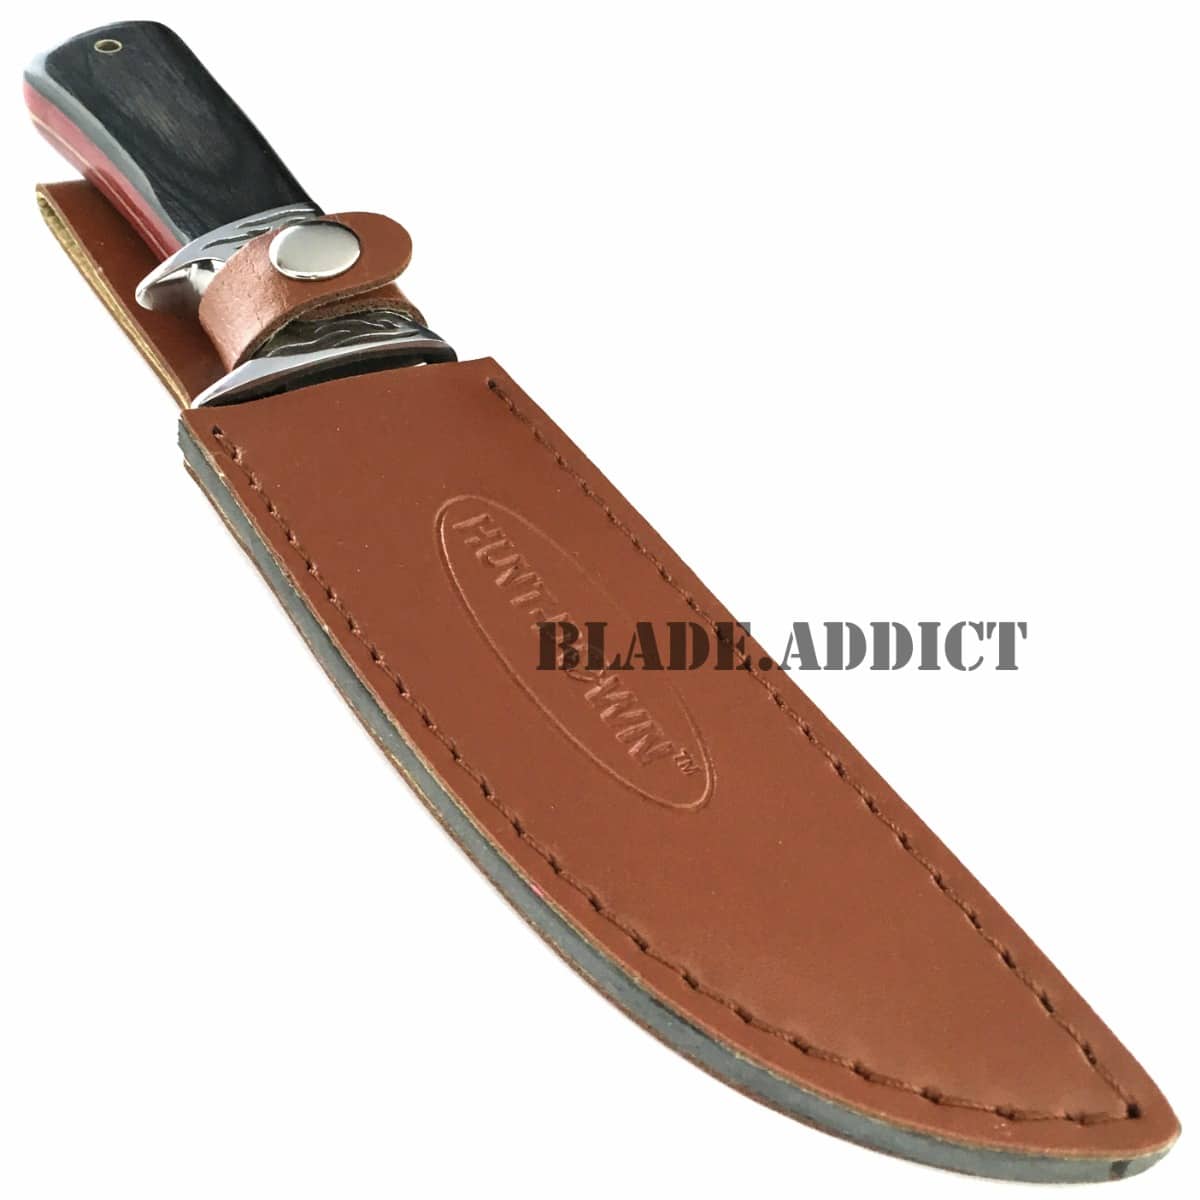 10.25" Fixed Blade Full Tang Hunting Skinning Knife  Survival Army Bowie Blade